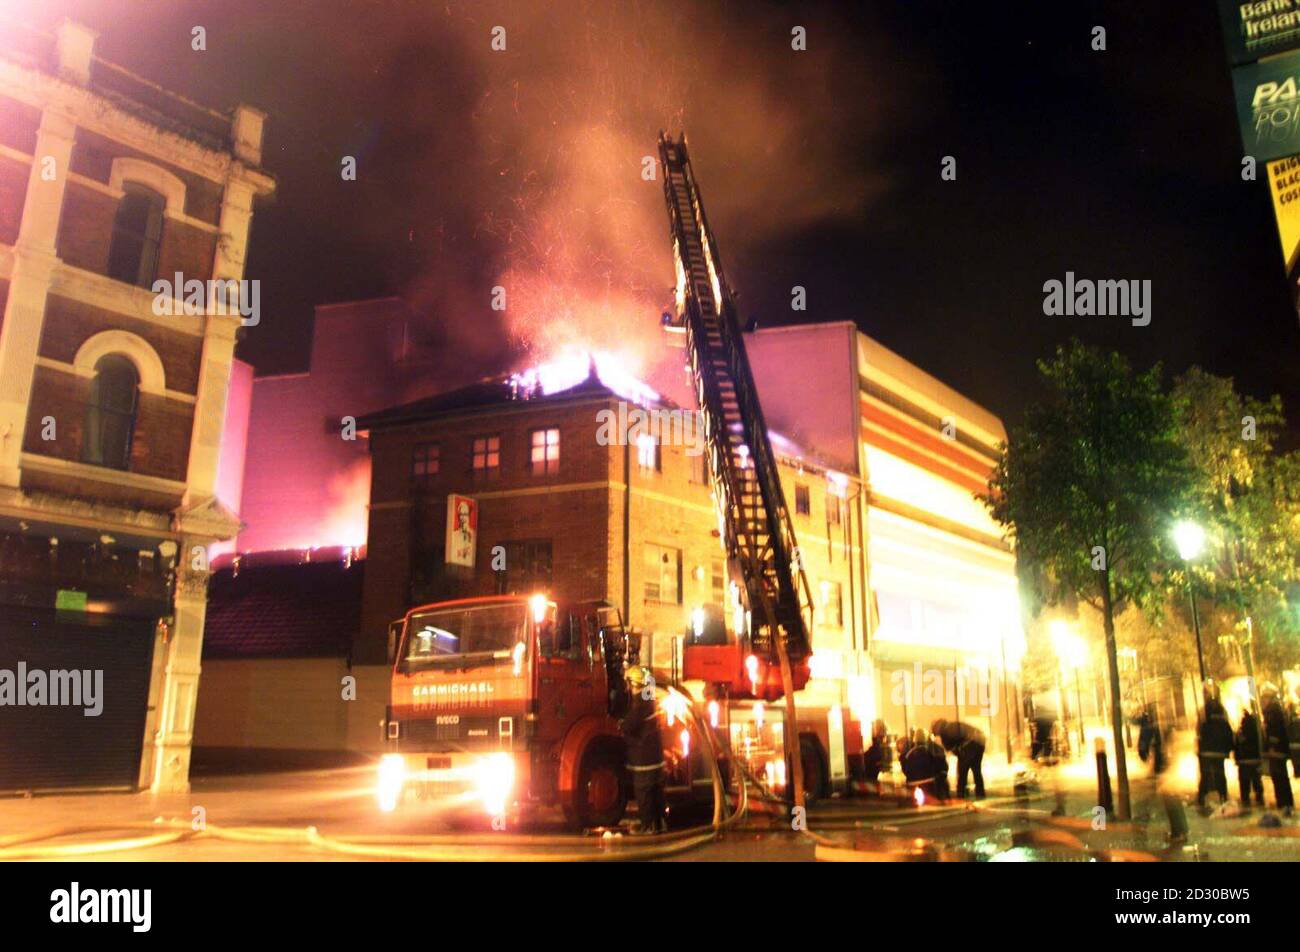 Firemen fight a blaze at a Kentucky Fried Chicken restaurant  in Londonderry.  Buildings and cars were set alight and shops looted as violence flared on the streets of Londonderry in the wake of the Loyalist Apprentice Boys parade. Stock Photo